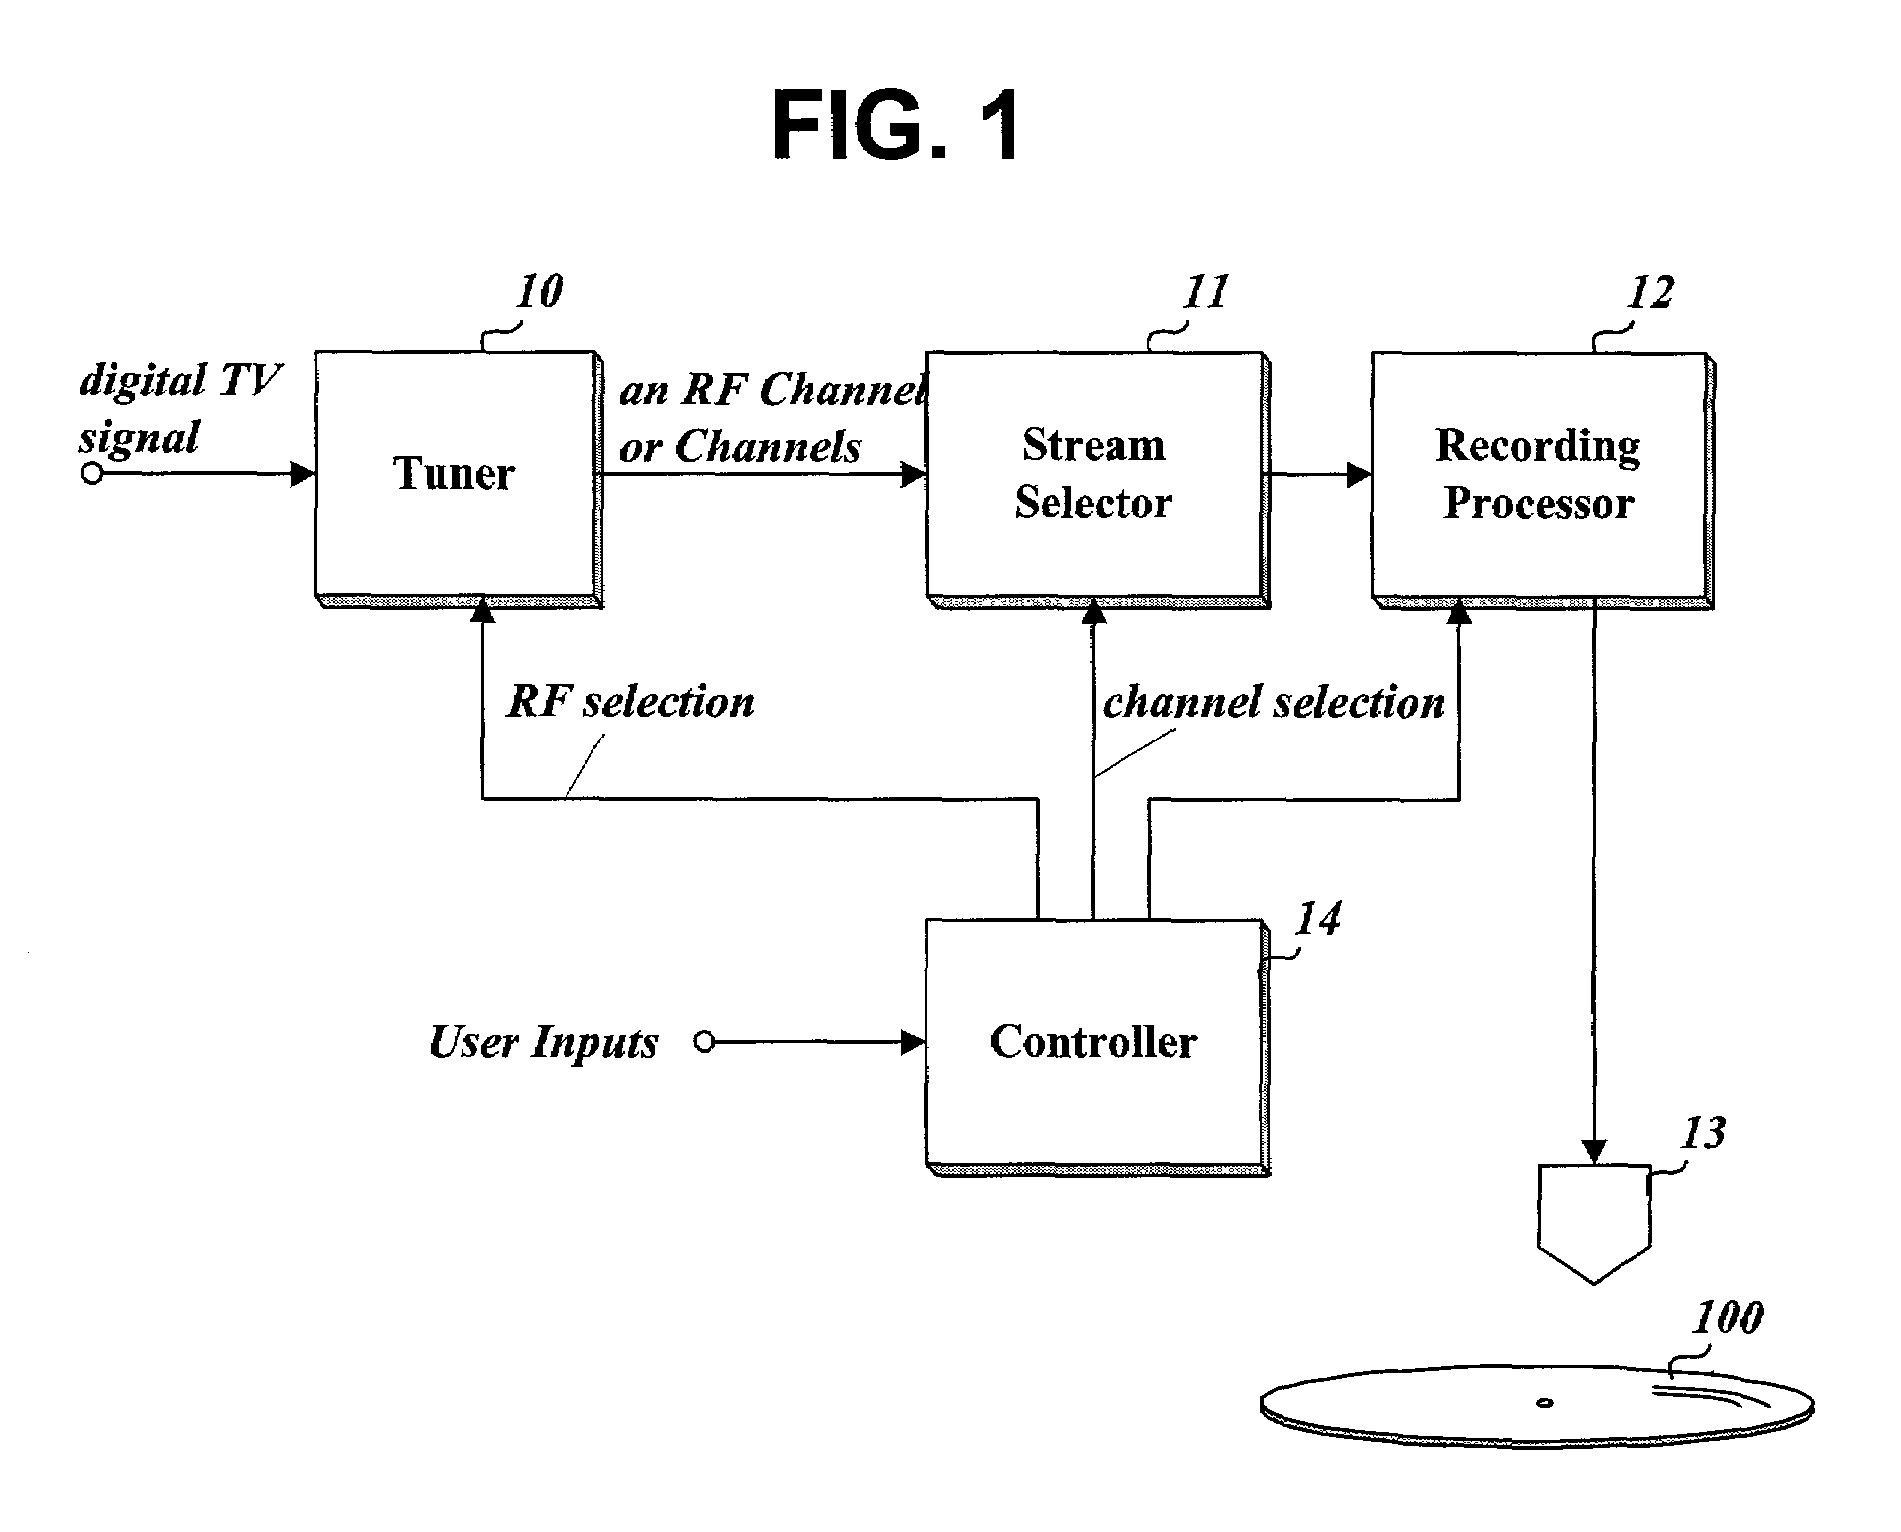 Method and apparatus of recording a multi-channel stream, and a recording medium containing a multi-channel stream recorded by said method